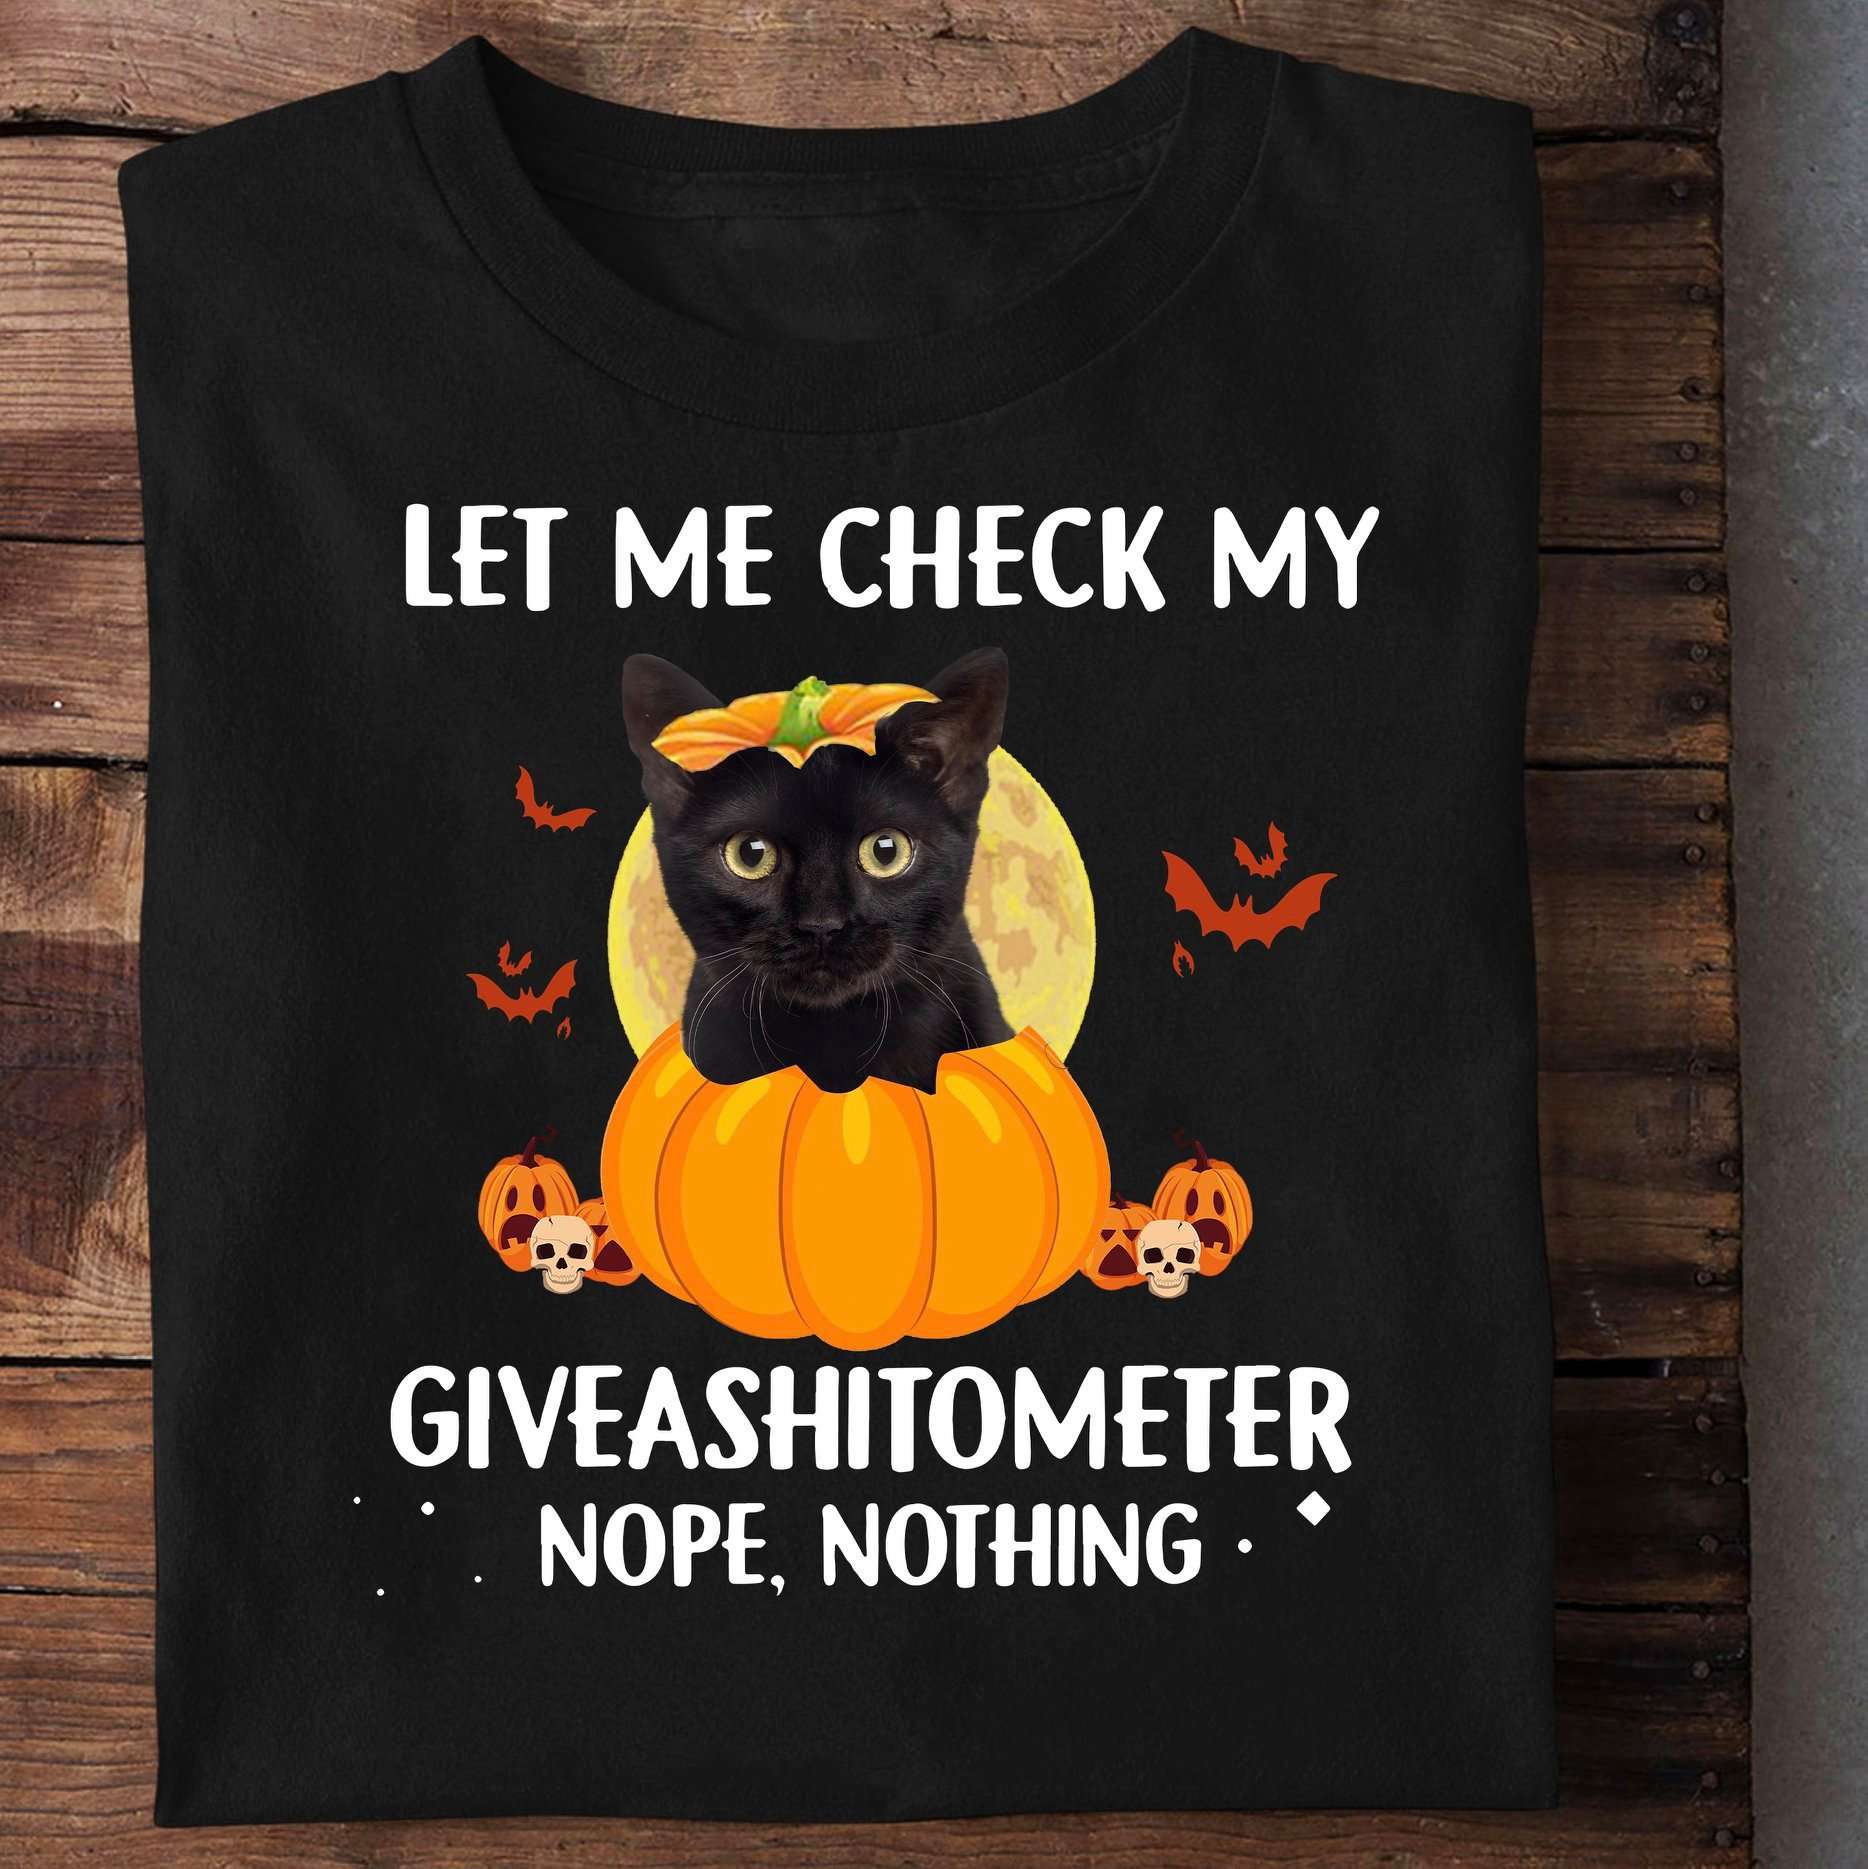 Pumpkin Black Cat, Halloween Costume - Let me check my giveashitometer nope nothing